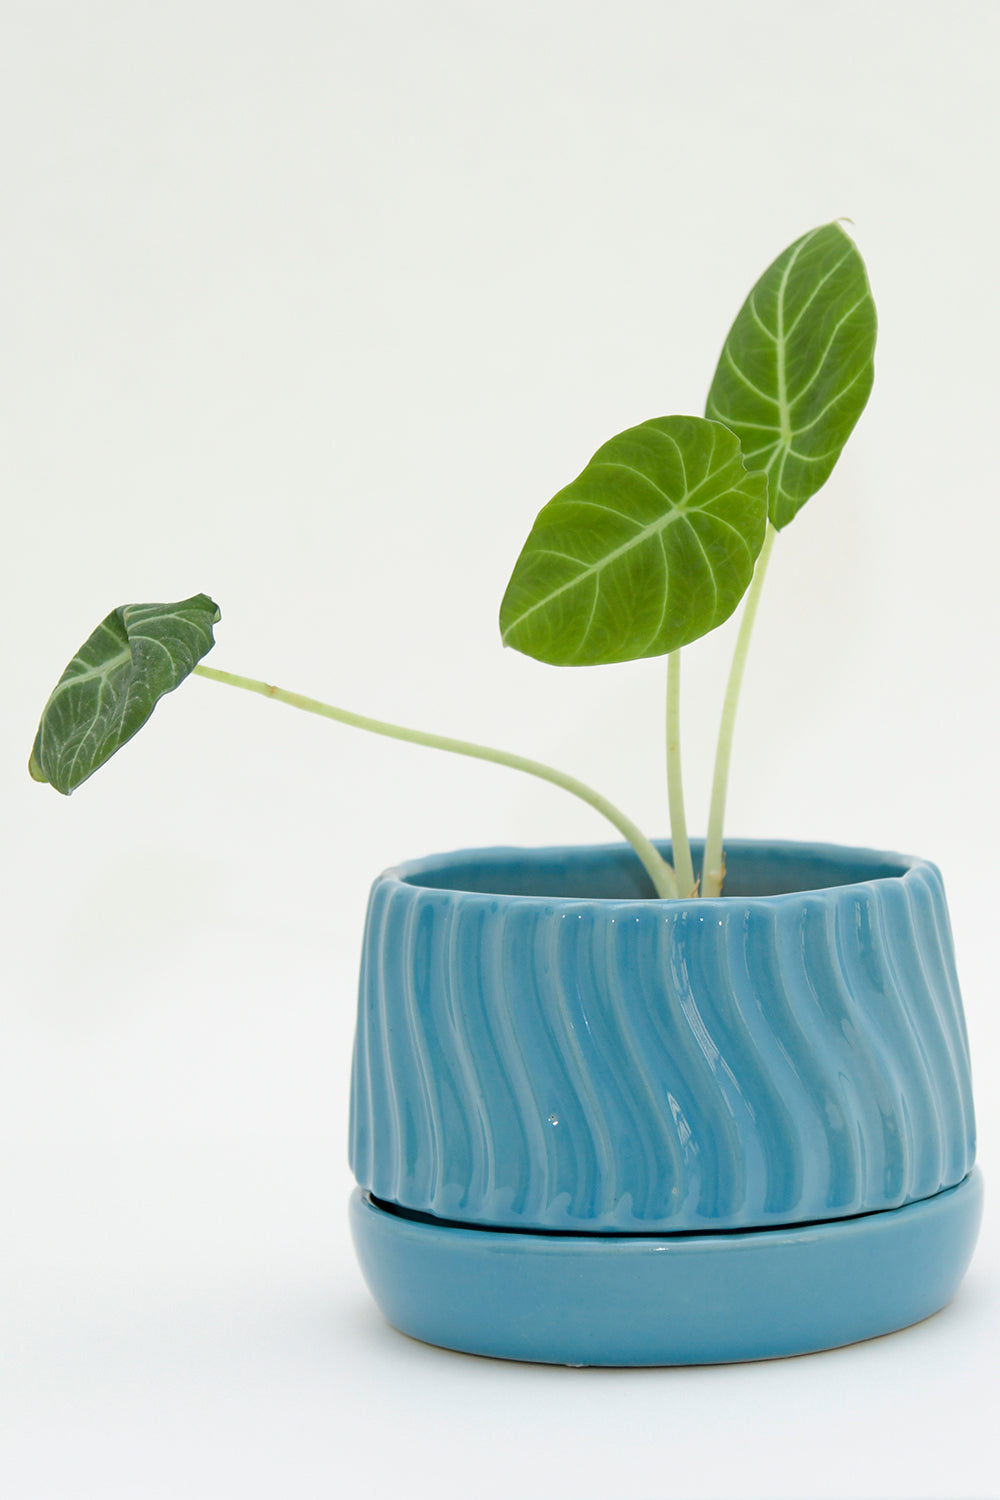 Bowl size Fallen Angels ceramic tabletop in Turquise color with Alocasia plant in it.